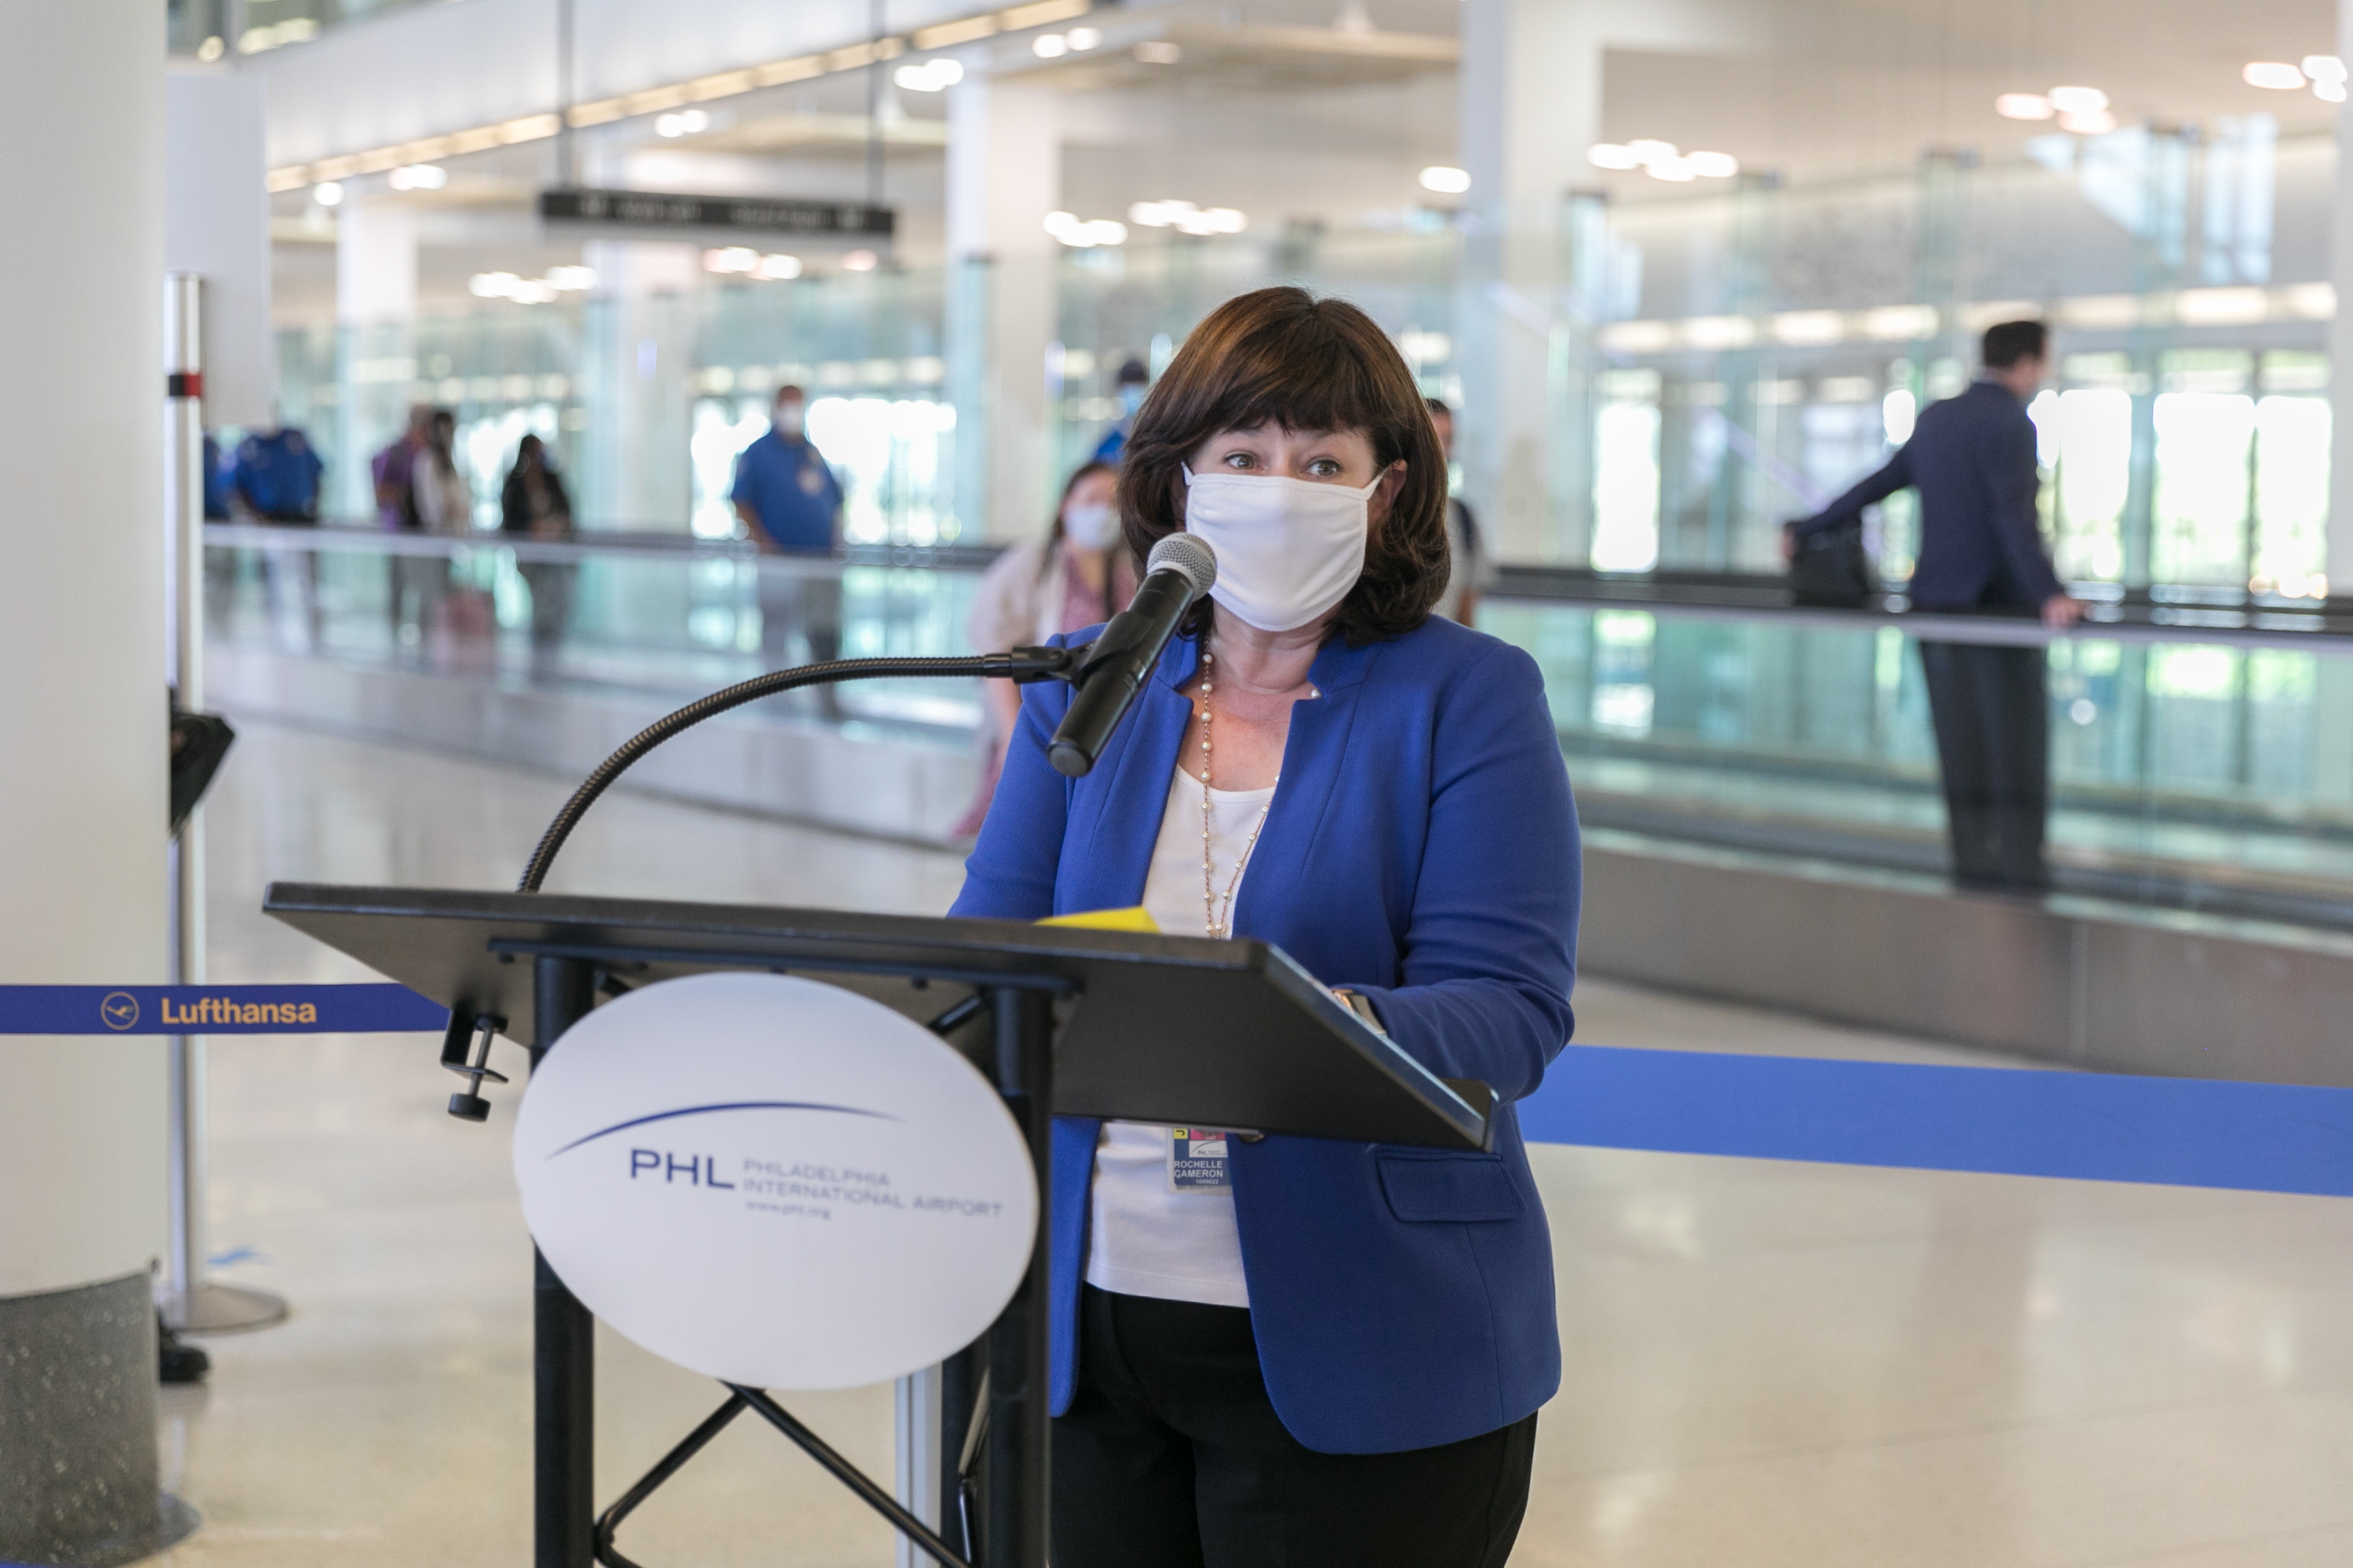 Chellie Cameron has worked tirelessly to get relief for airports due to the pandemic. Photo Courtesy of David Rosenblum/PHL International Airport.